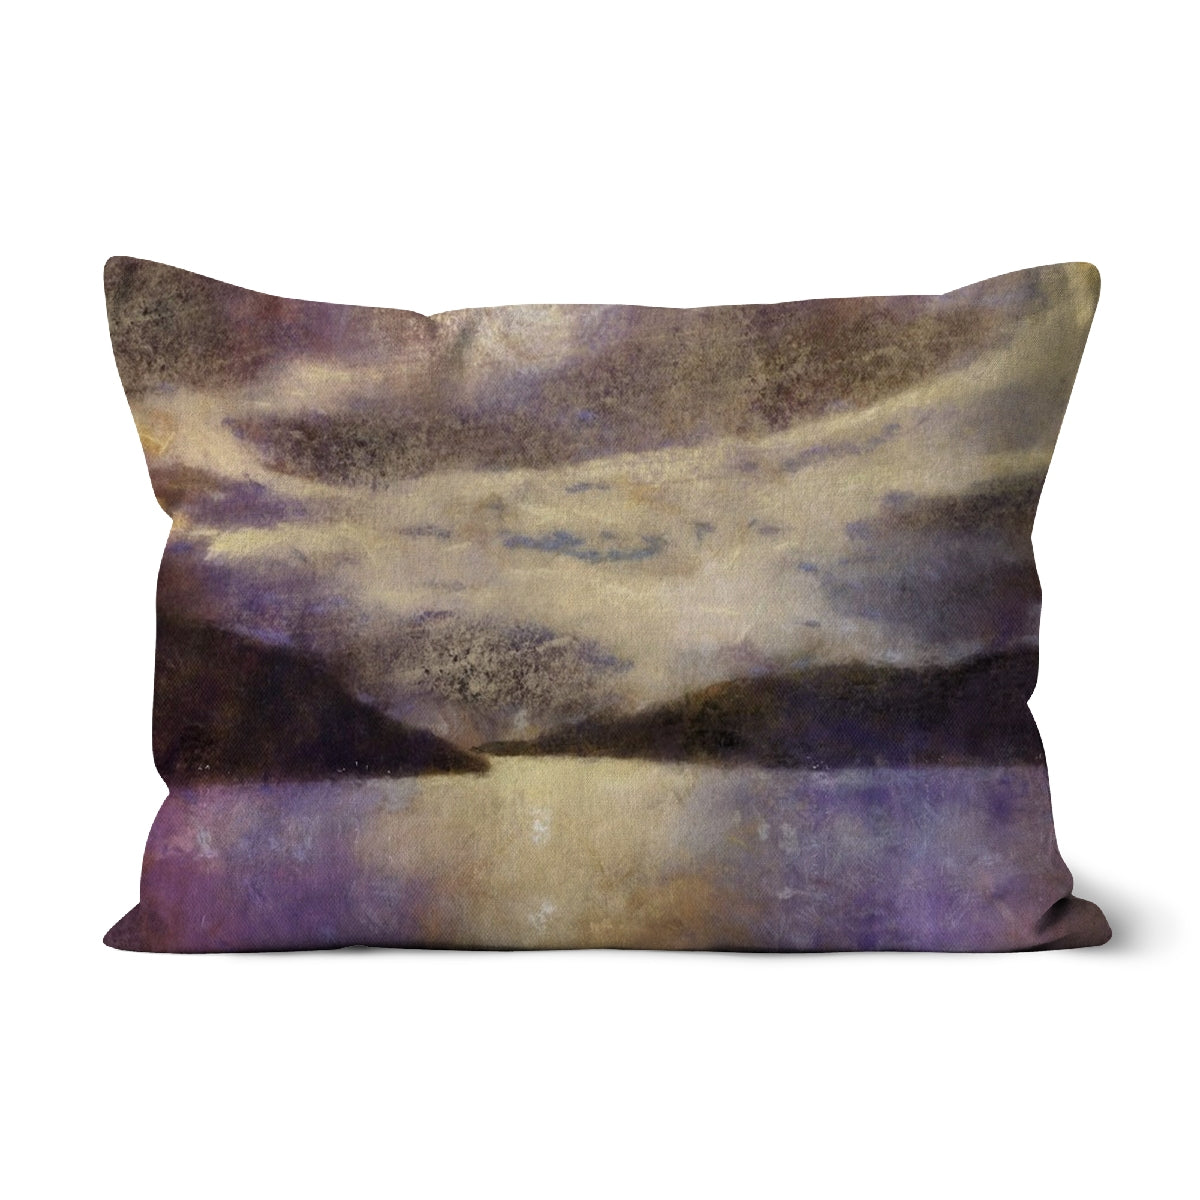 Moonlight Meets Lewis & Harris Art Gifts Cushion-Cushions-Hebridean Islands Art Gallery-Canvas-19"x13"-Paintings, Prints, Homeware, Art Gifts From Scotland By Scottish Artist Kevin Hunter